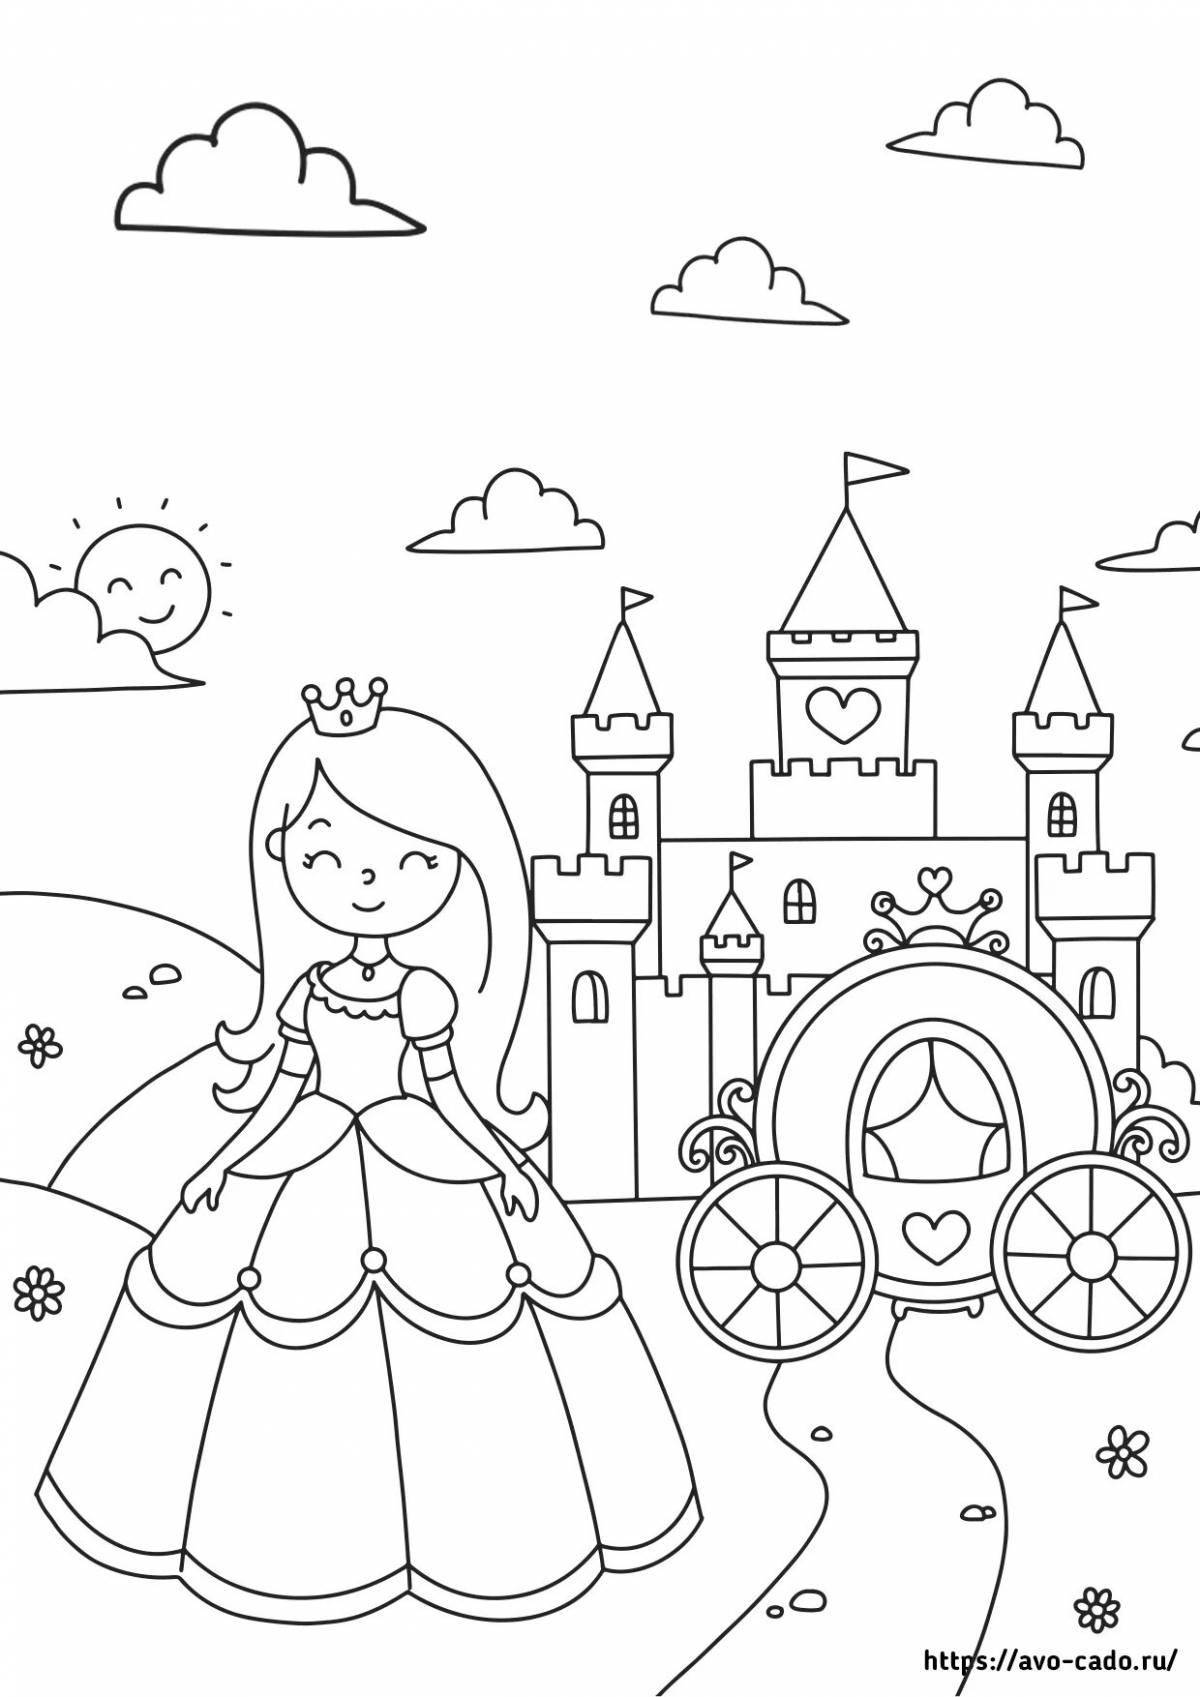 Adorable coloring book for girls princess castle